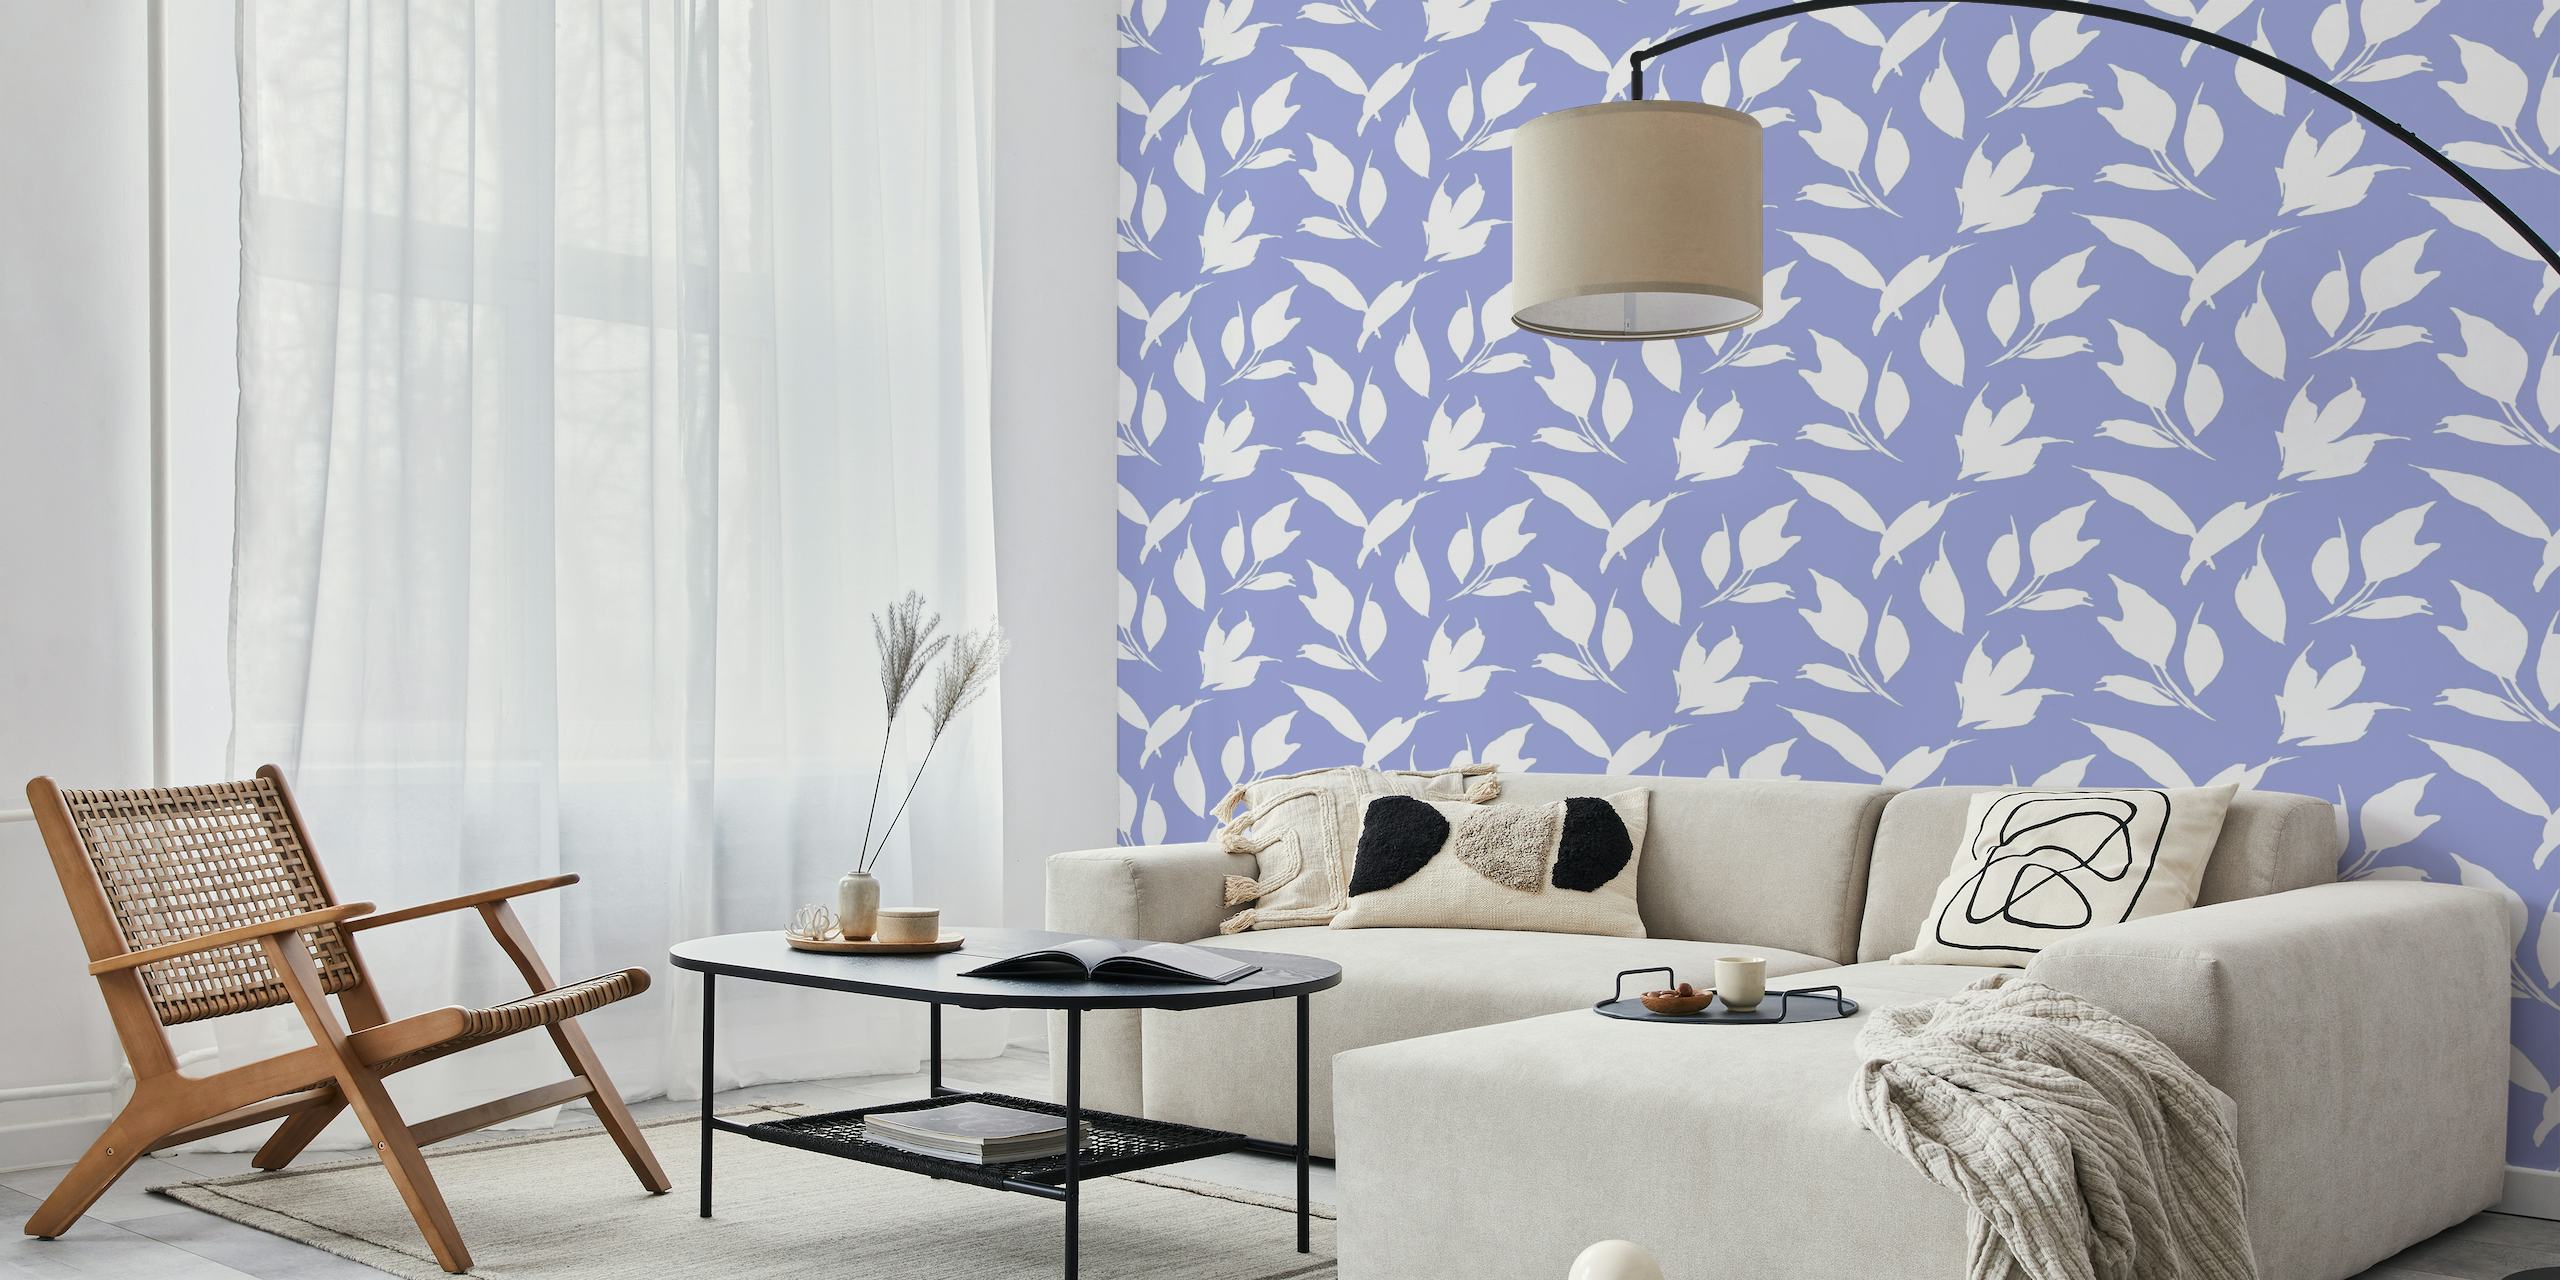 Simple botanical leaves pattern in white on a purple background for wall mural